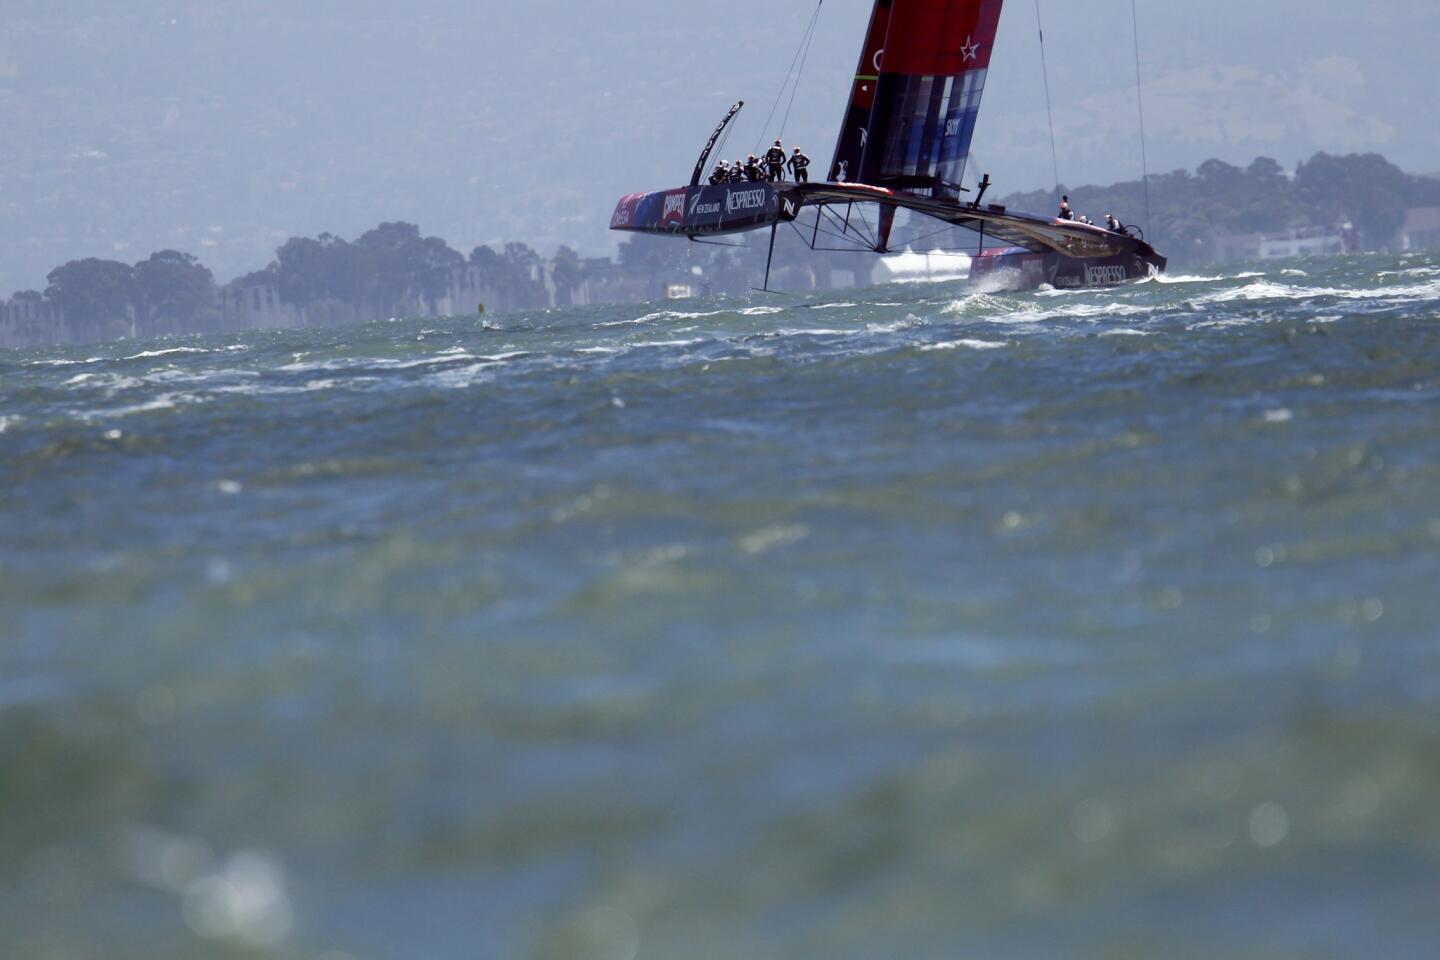 Emirates Team New Zealand sails on San Francisco Bay during the round robin one yacht races of the Luis Vuitton Cup challenger series in the 34th America's Cup in San Francisco